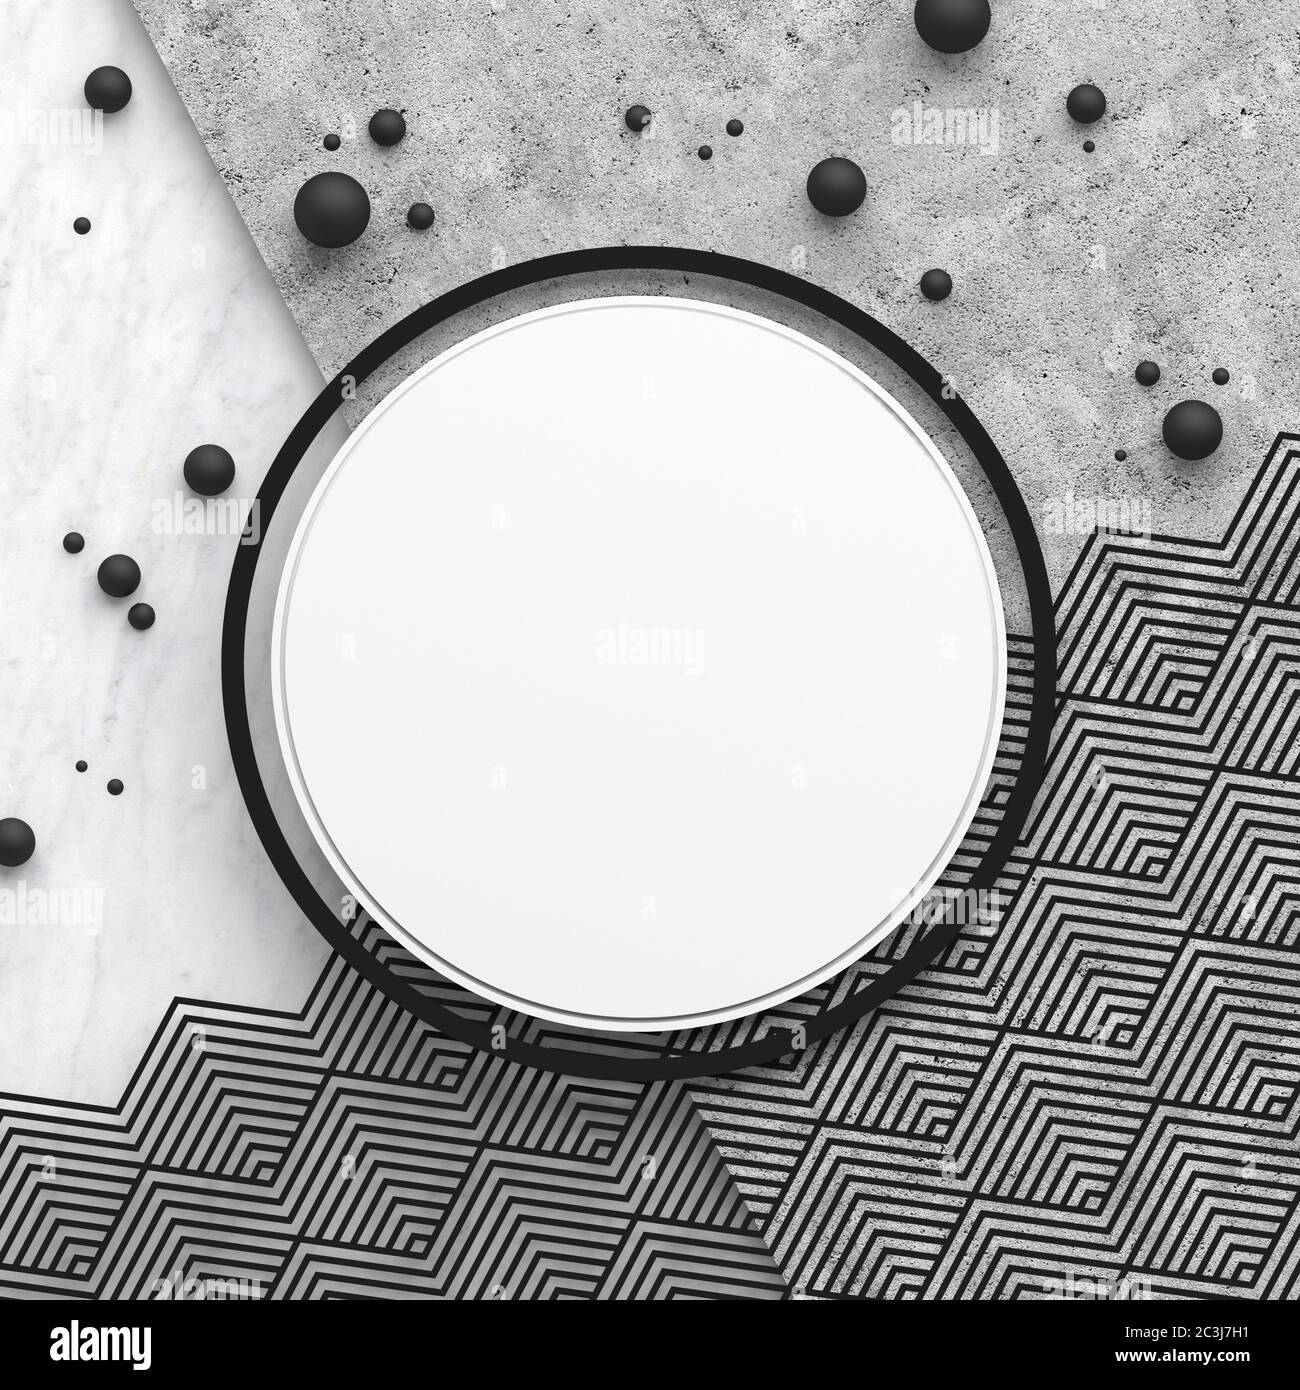 A round border frame on white marble stone and gray concrete surface with a triangular pattern. Copy space. Abstract geometric composition. 3D render. Stock Photo